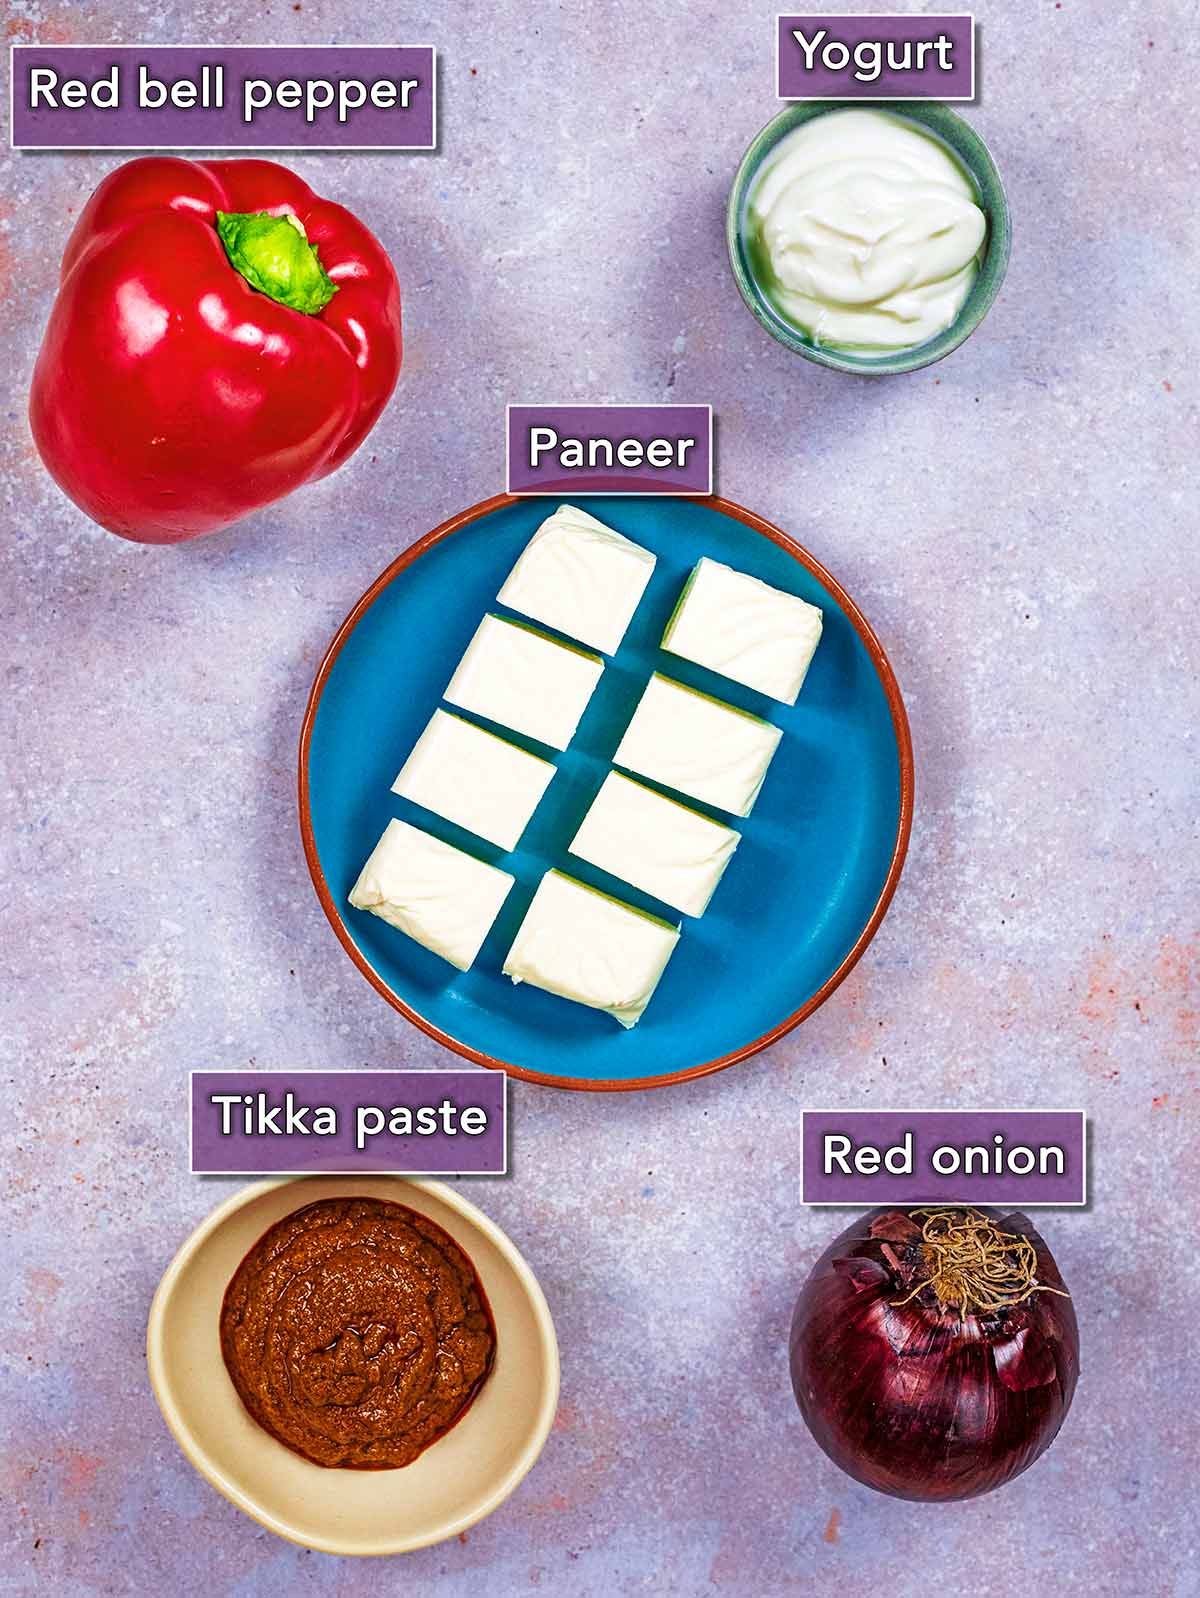 All the ingredients needed to make this recipe laid out with text overlay labels.